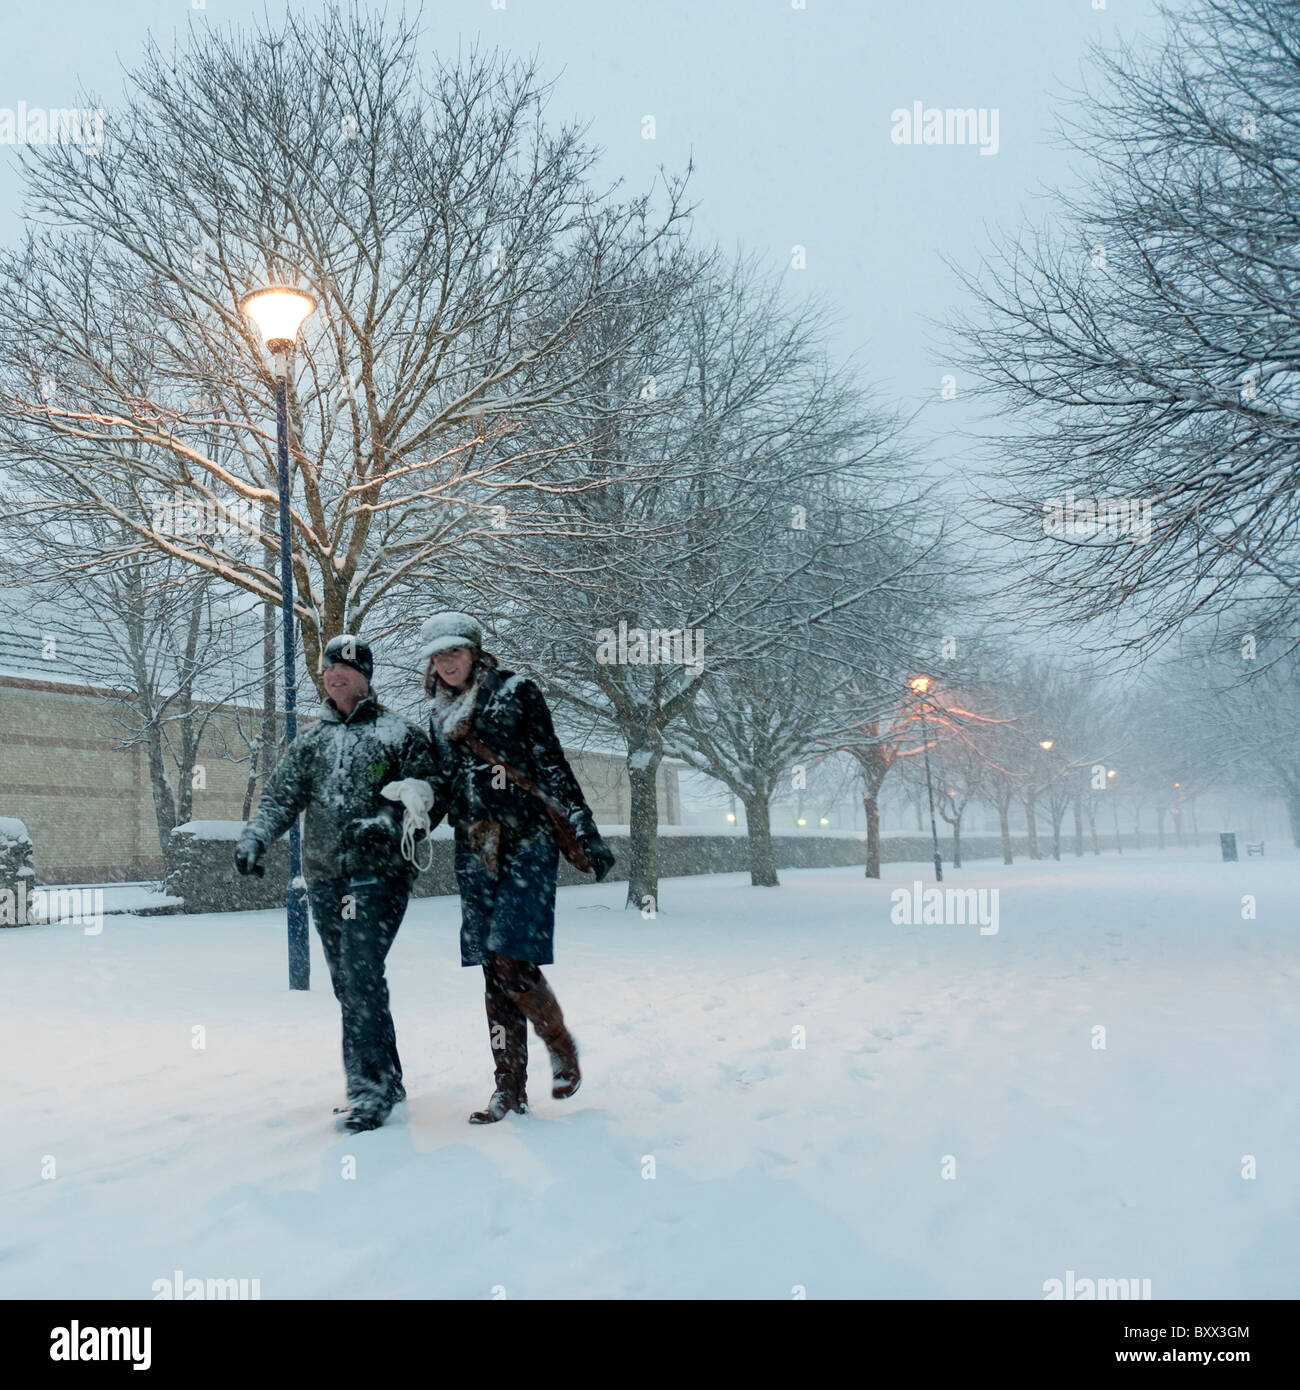 Early morning, people walking in the snow, Aberystwyth Wales UK December 2010 Stock Photo